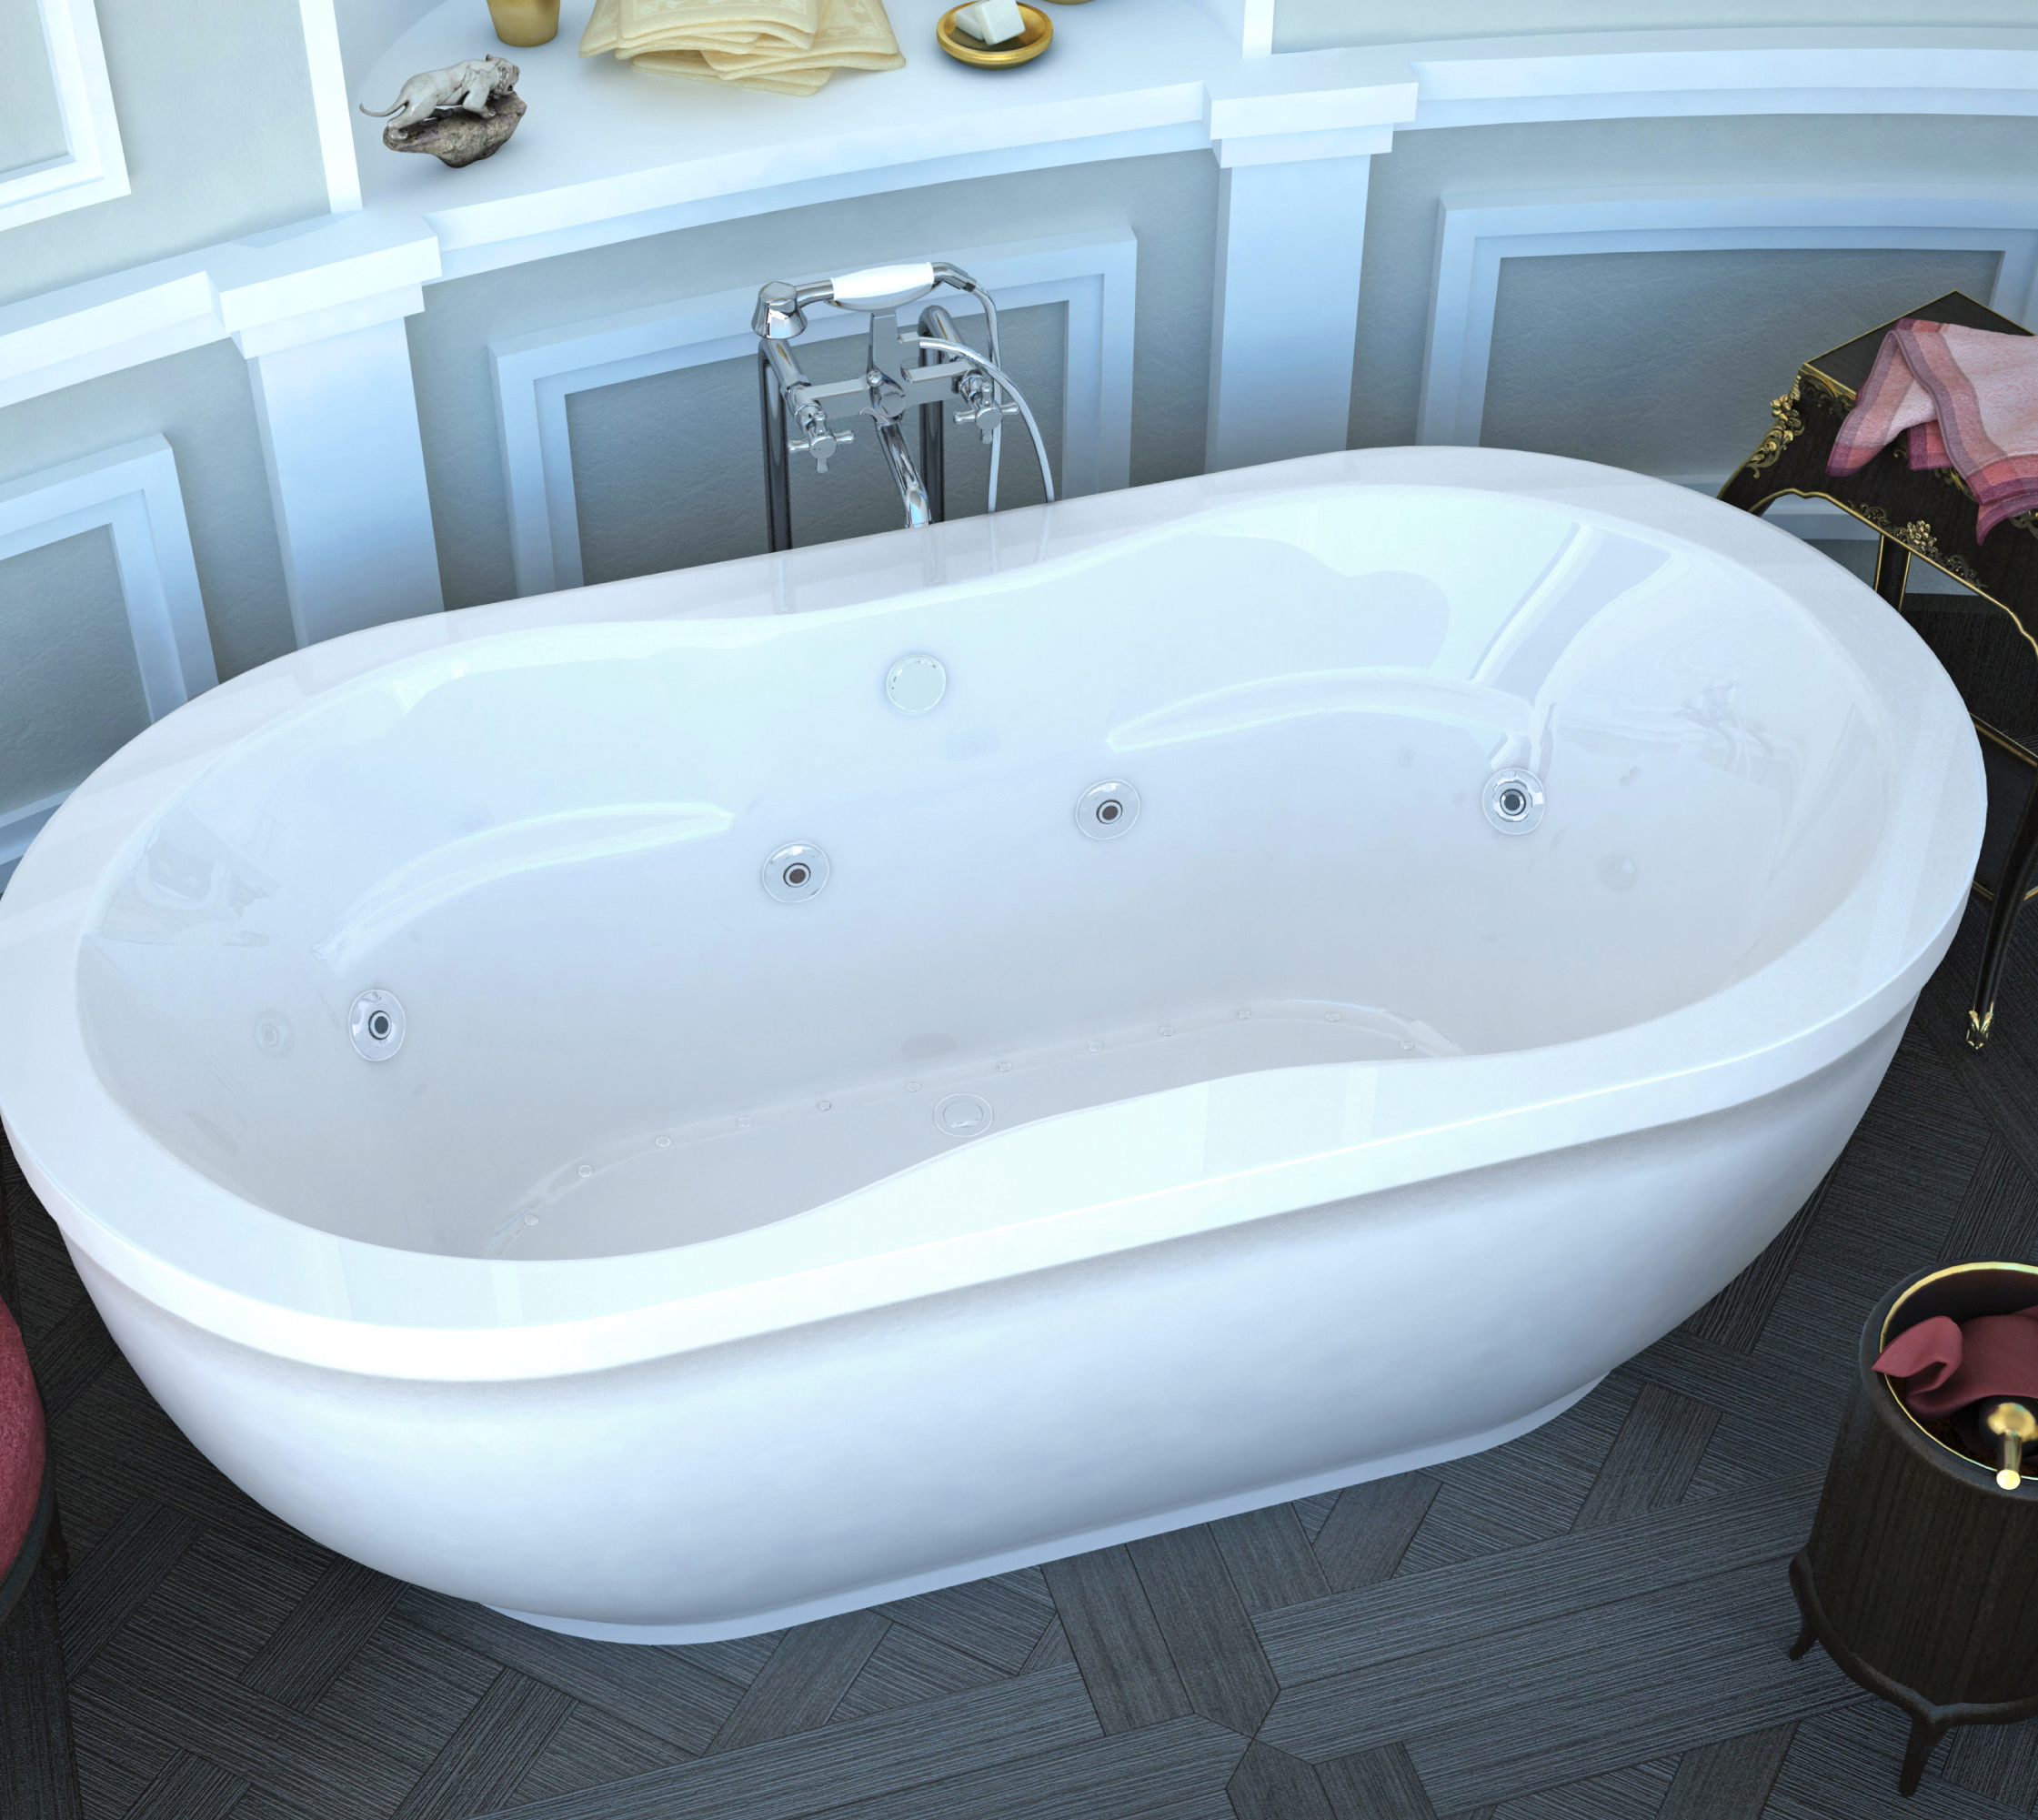 Velia 34 x 71 x 21 in. Oval Freestanding Air & Whirlpool Water Jetted Bathtub